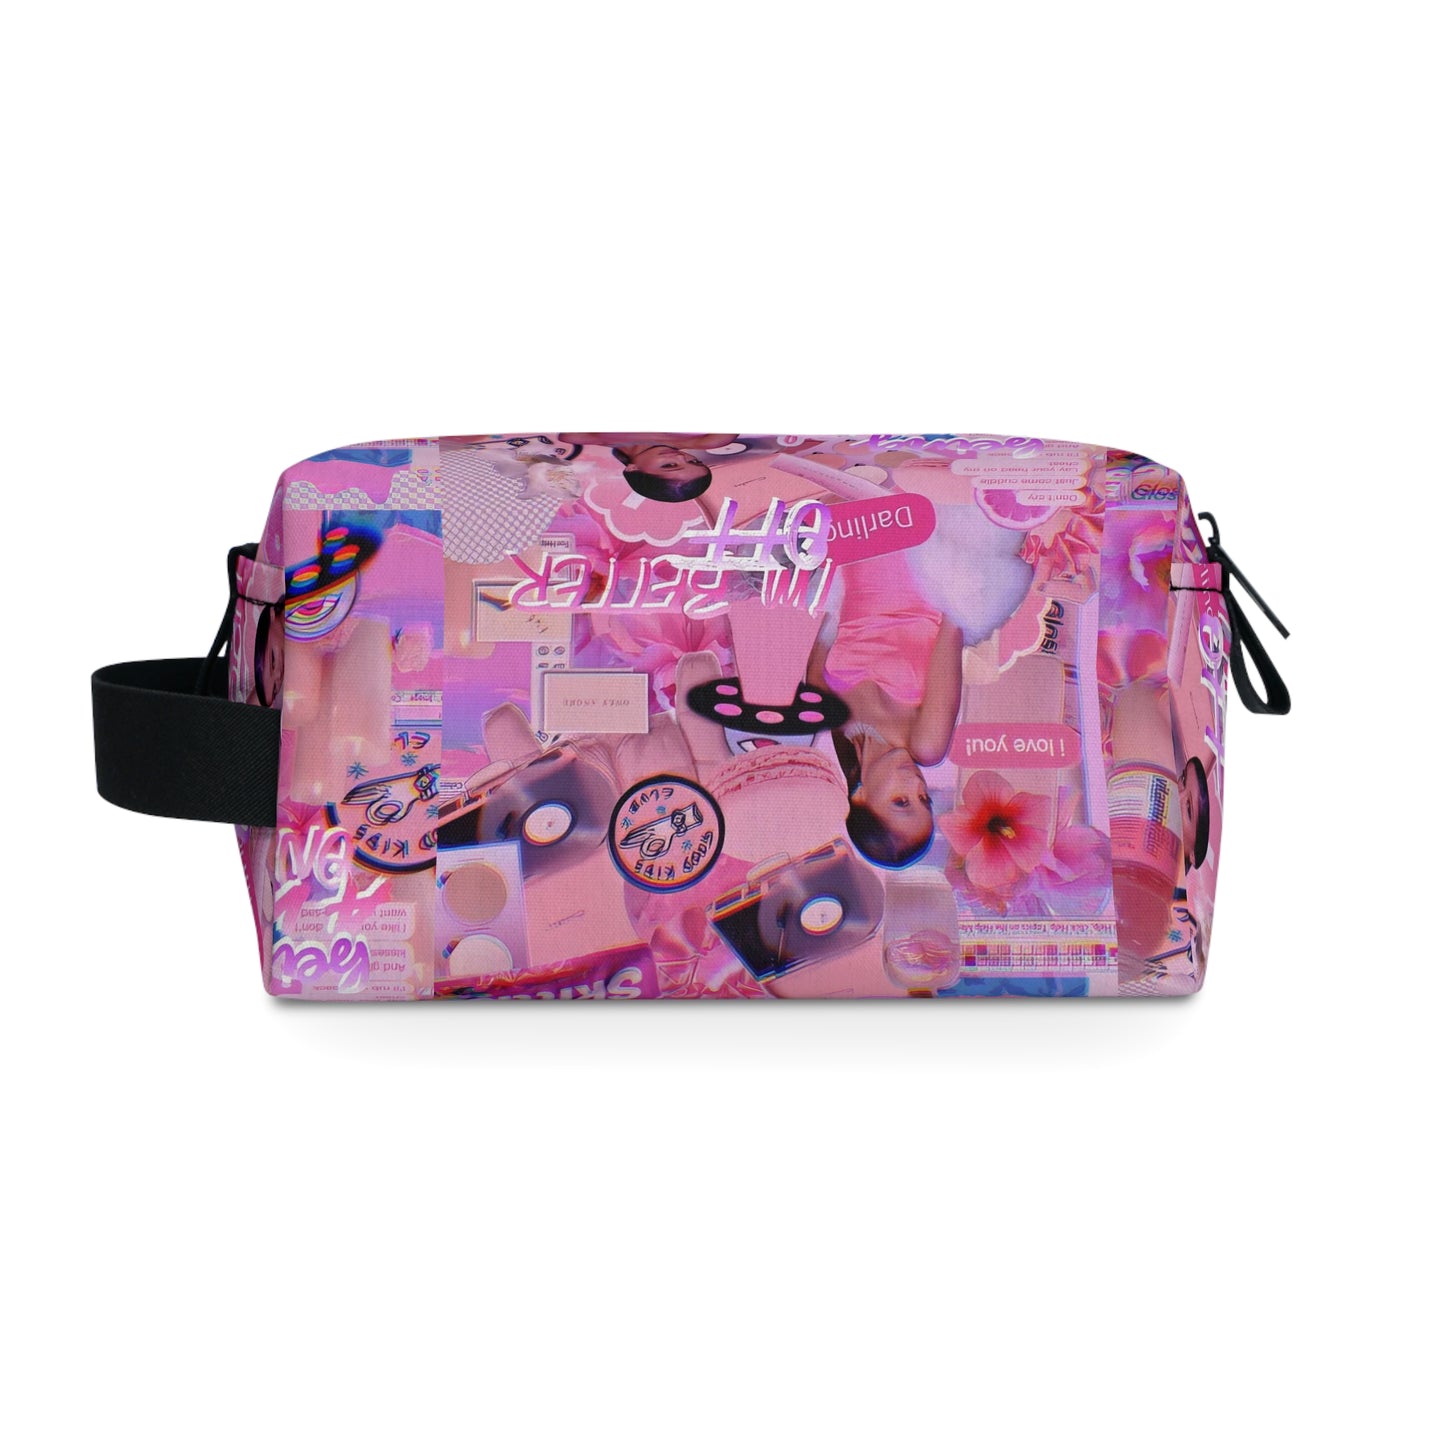 Ariana Grande Purple Vibes Collage Toiletry Bag